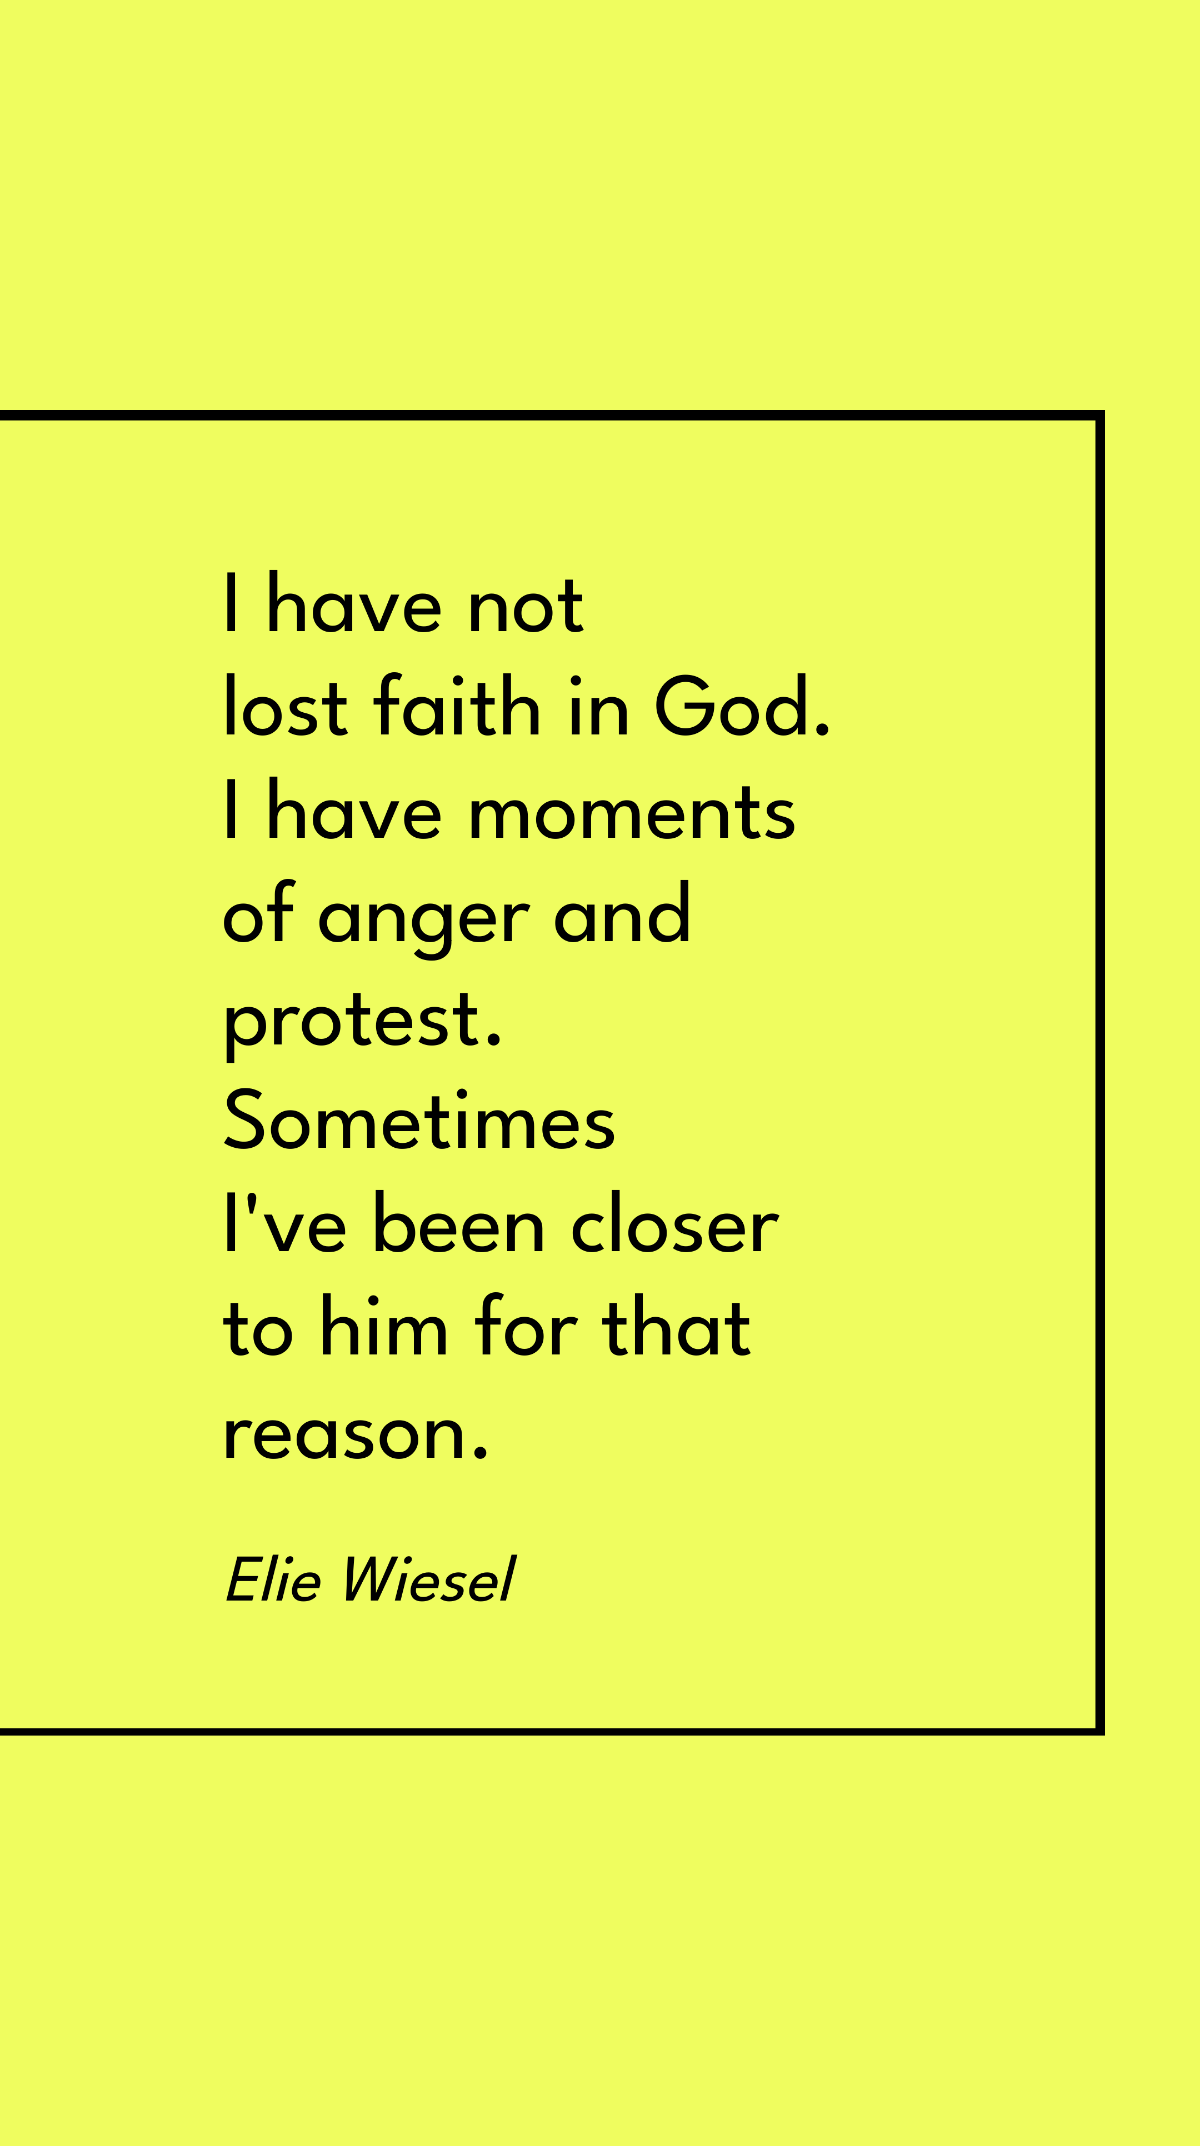 Elie Wiesel - I have not lost faith in God. I have moments of anger and protest. Sometimes I've been closer to him for that reason. Template